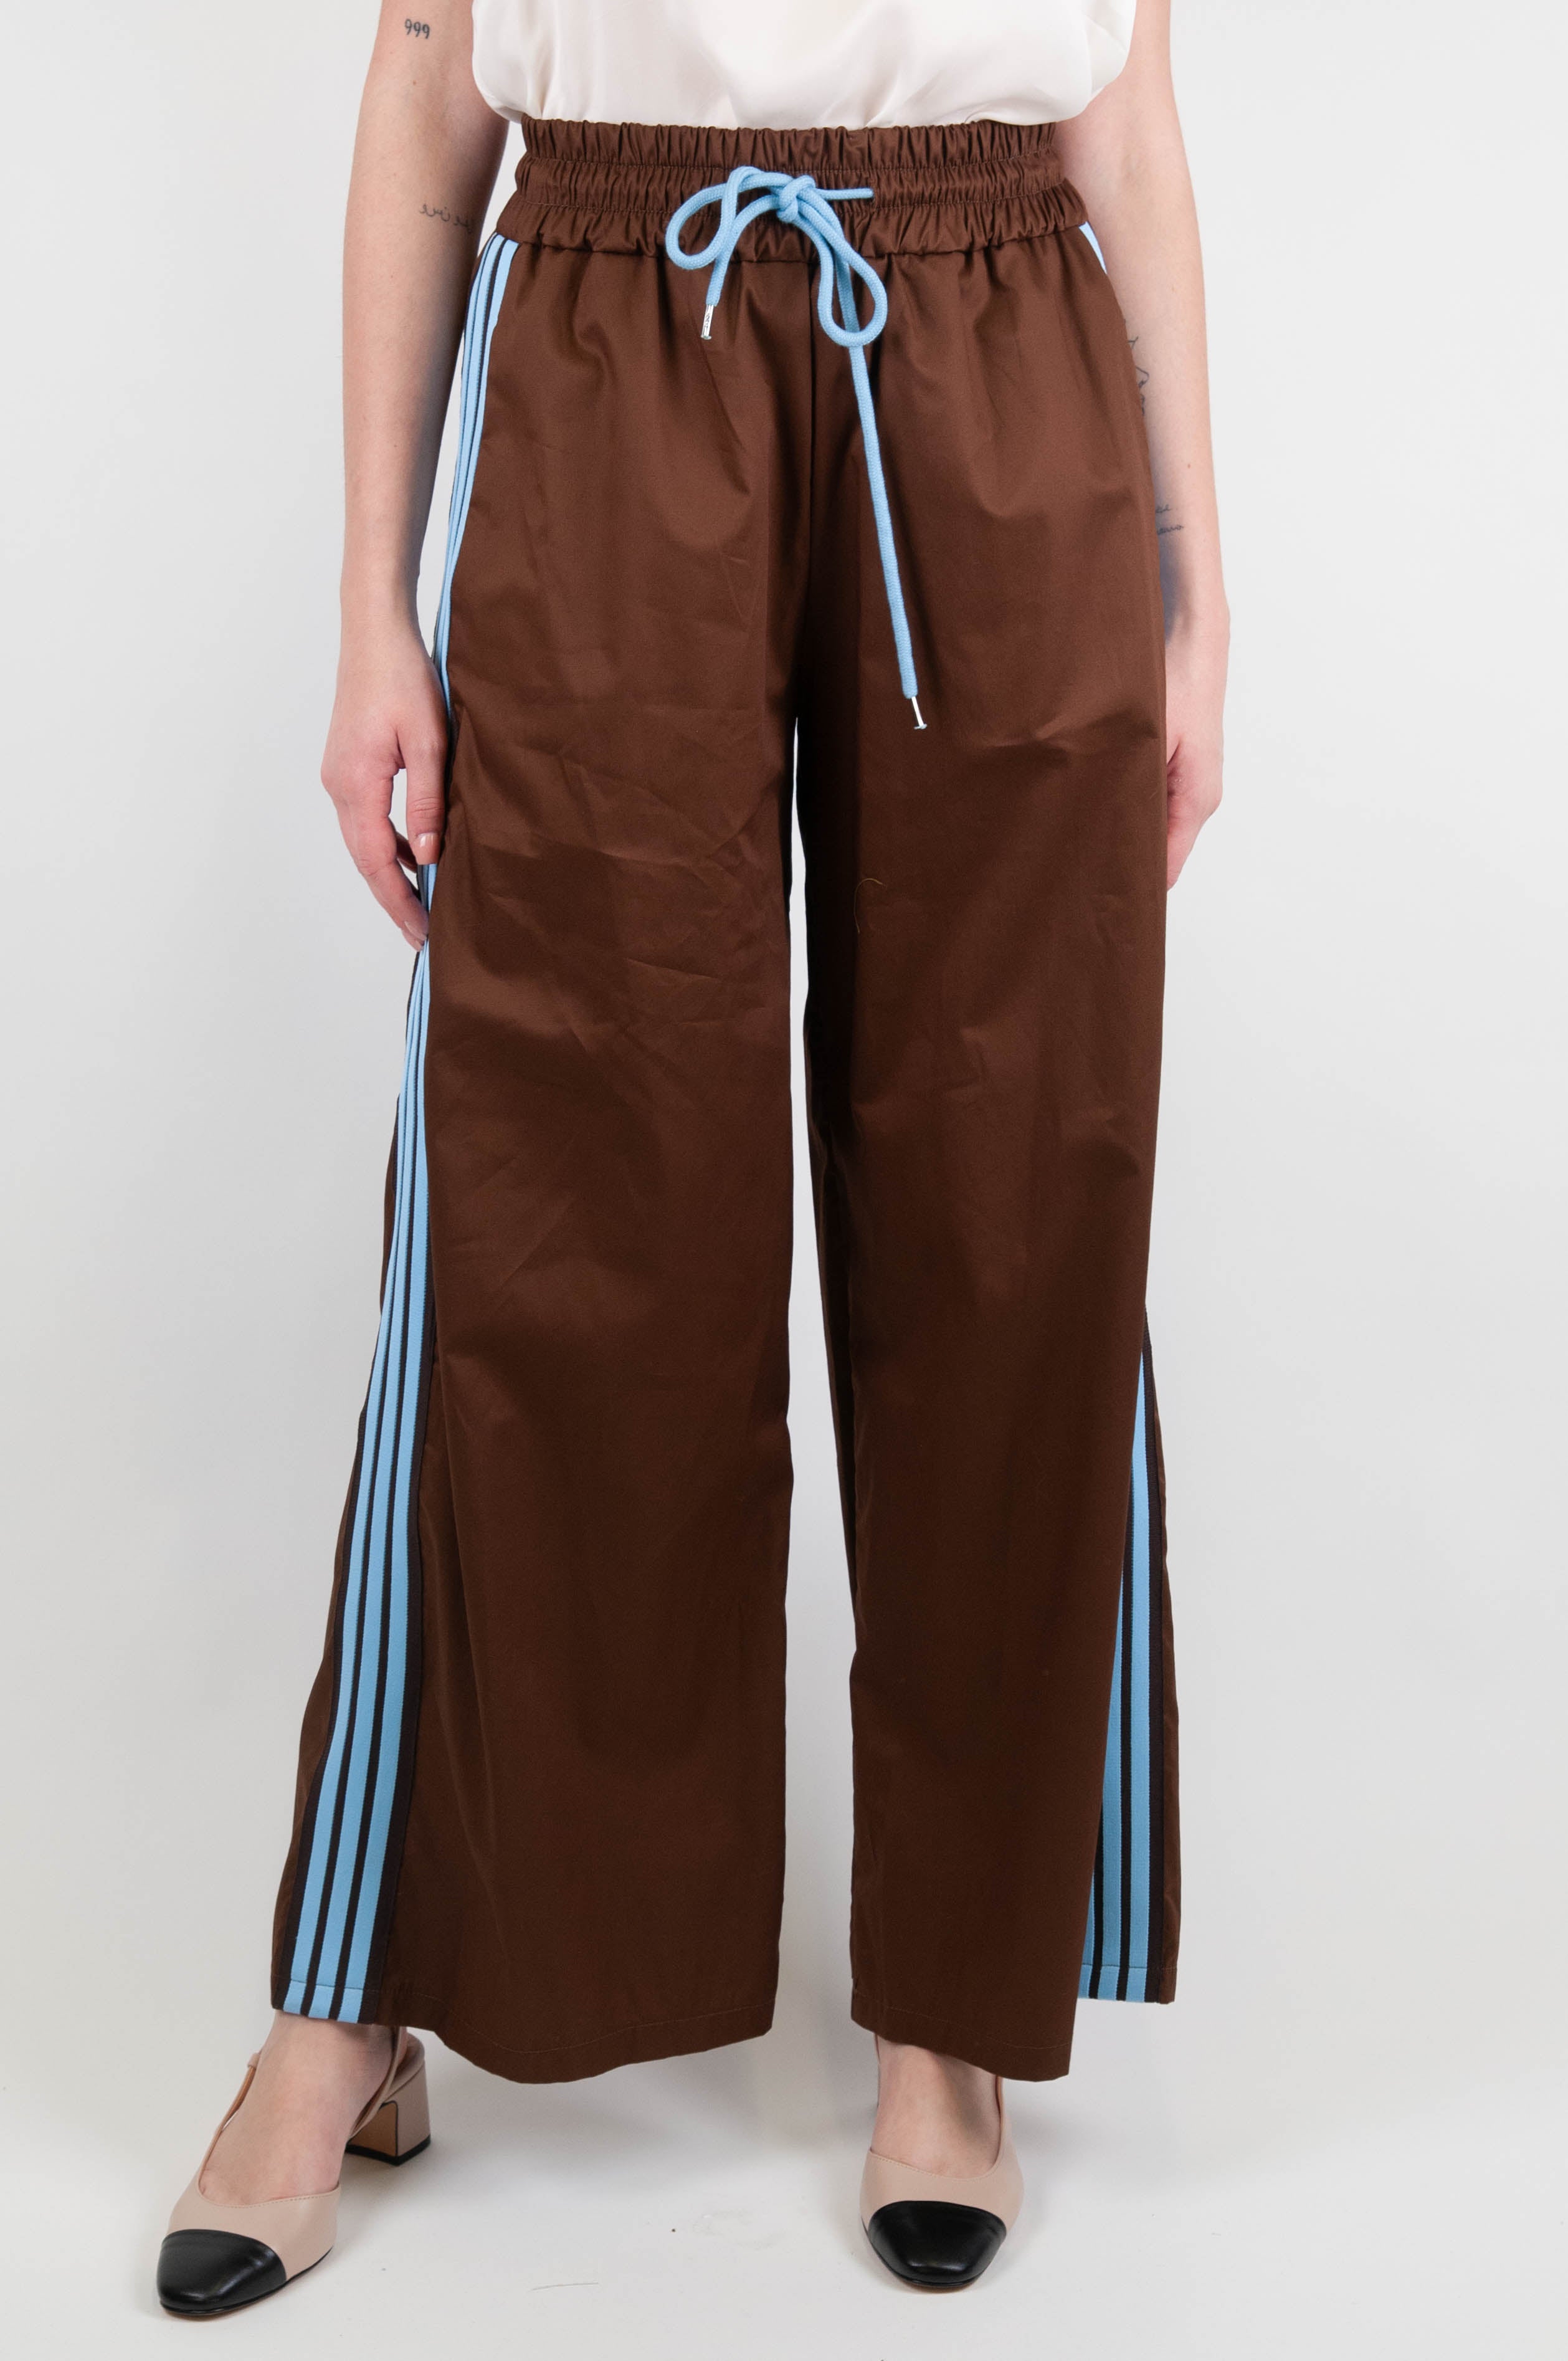 Tension in - Palazzo trousers with side bands and drawstring